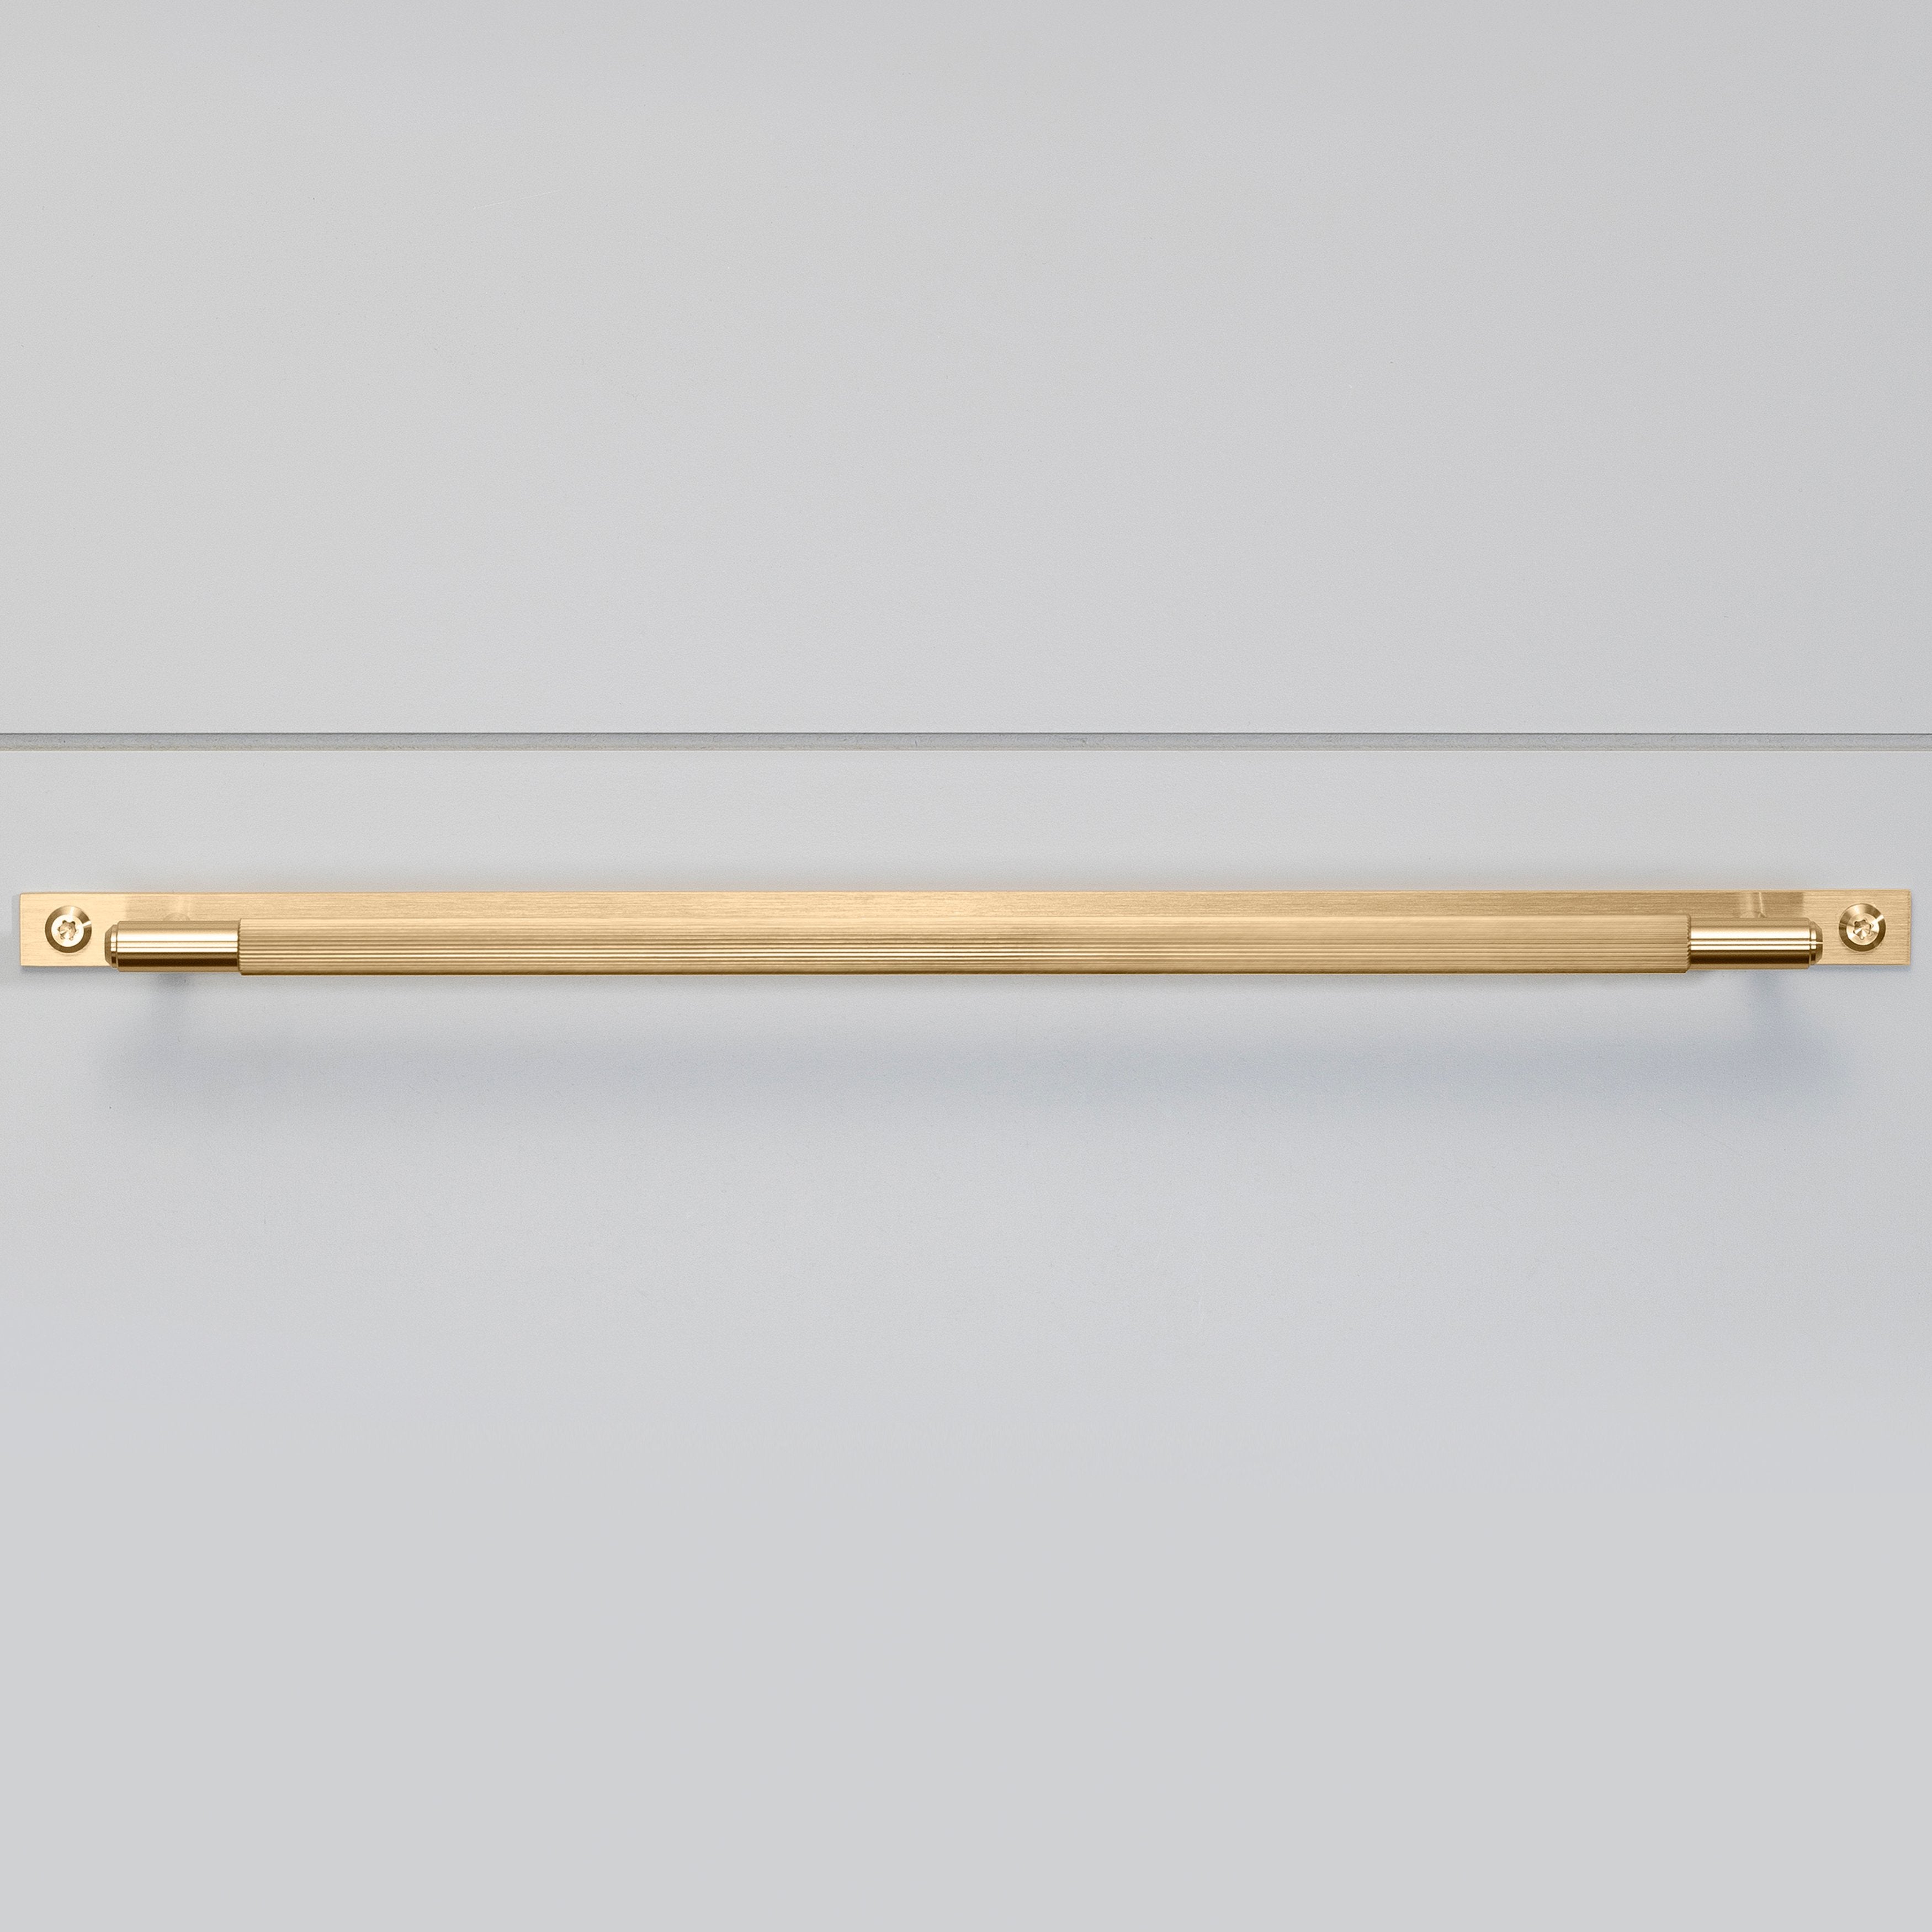 PULL BAR / PLATE / LINEAR / BRASS - LARGE